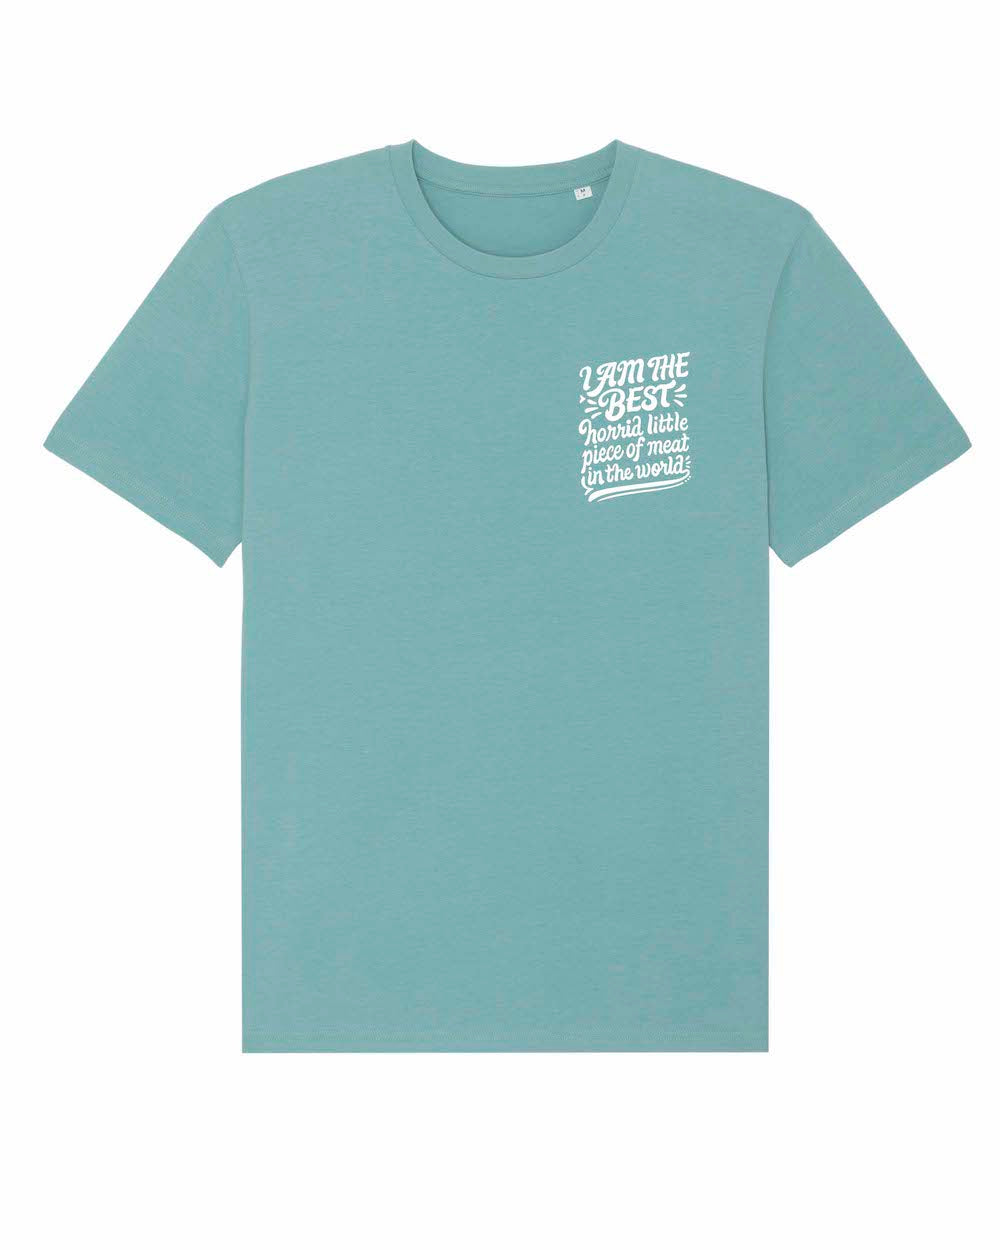 Best Horrid Little Piece Of Meat In The World T-Shirt (Teal)